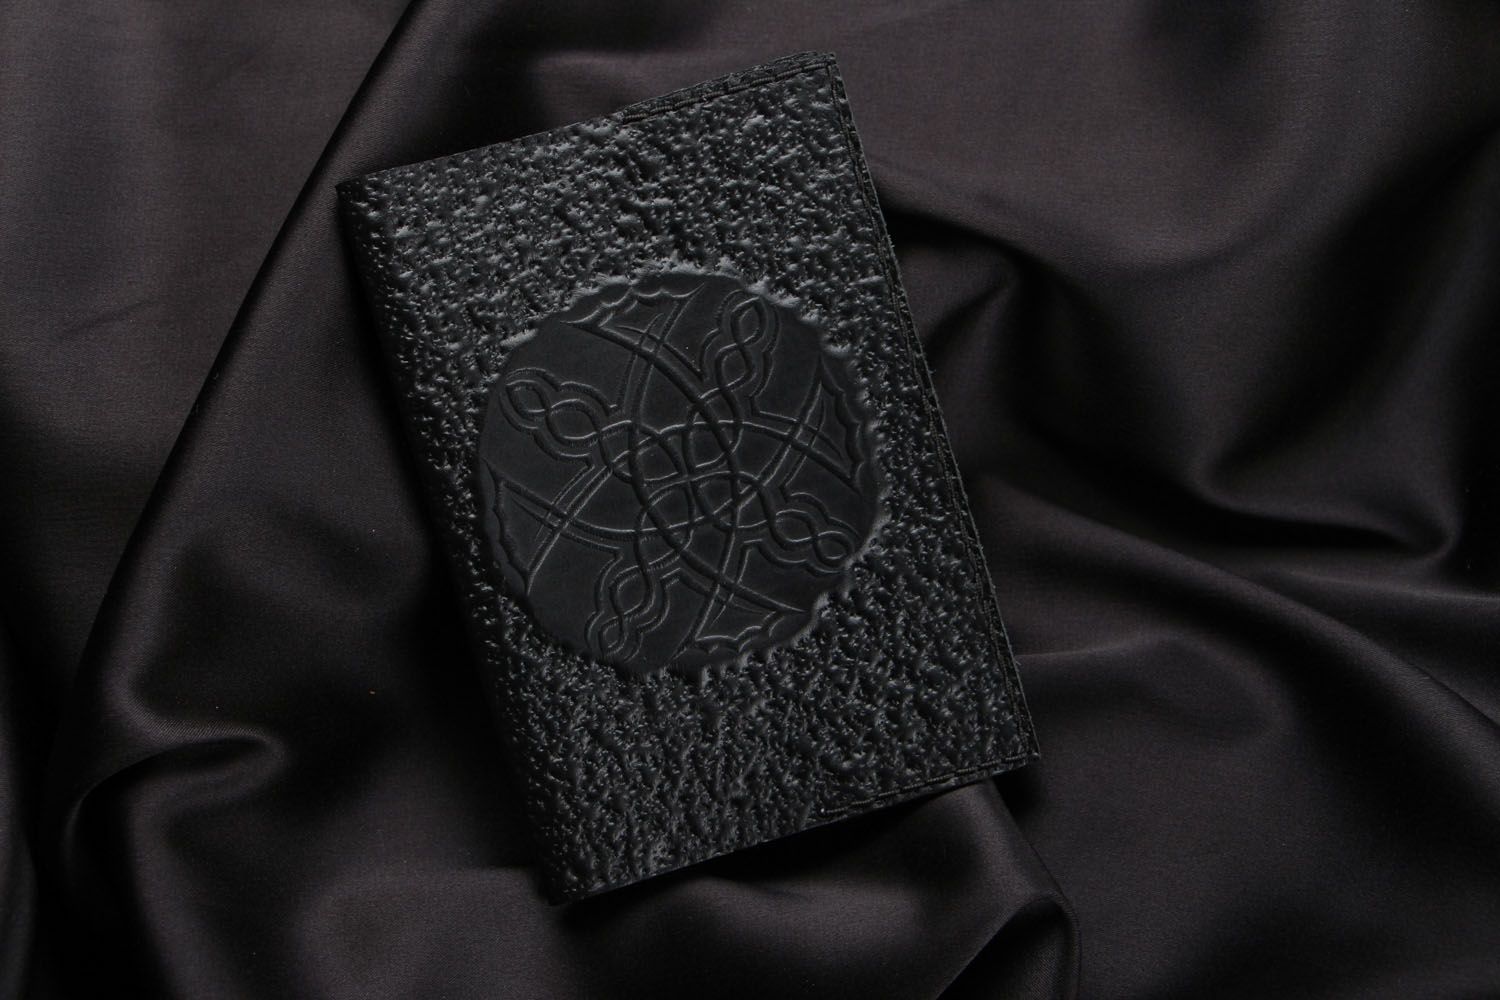 Leather passport cover photo 1